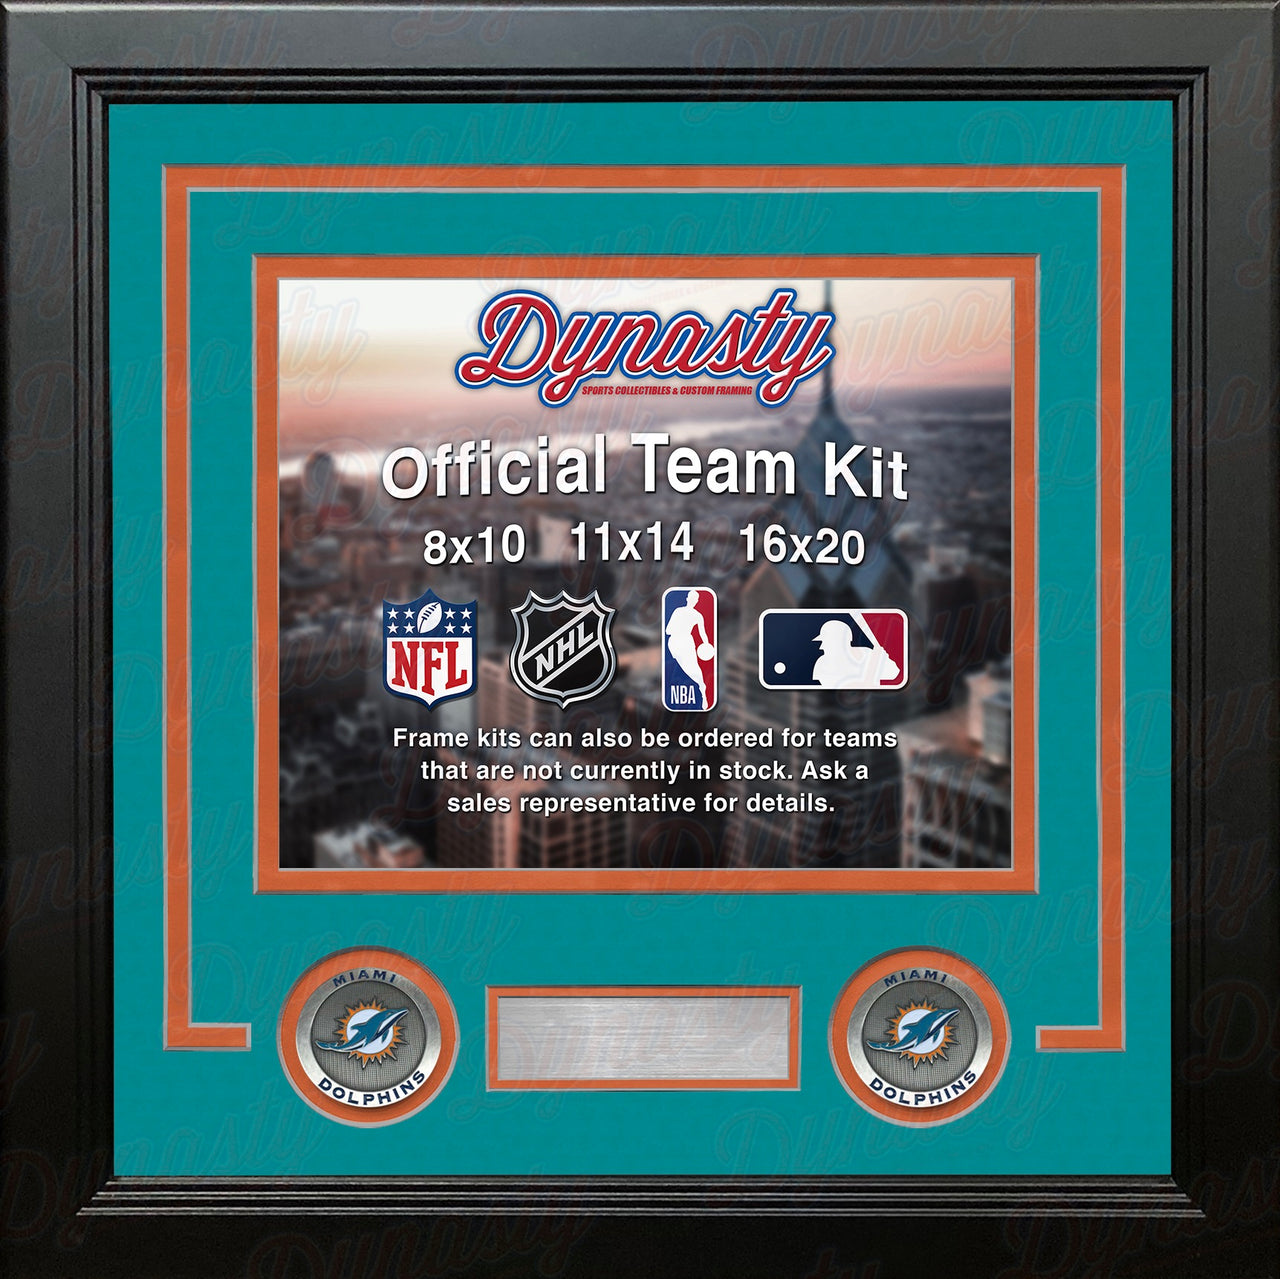 Miami Dolphins Teal Custom NFL Football 16x20 Picture Frame Kit - Dynasty Sports & Framing 